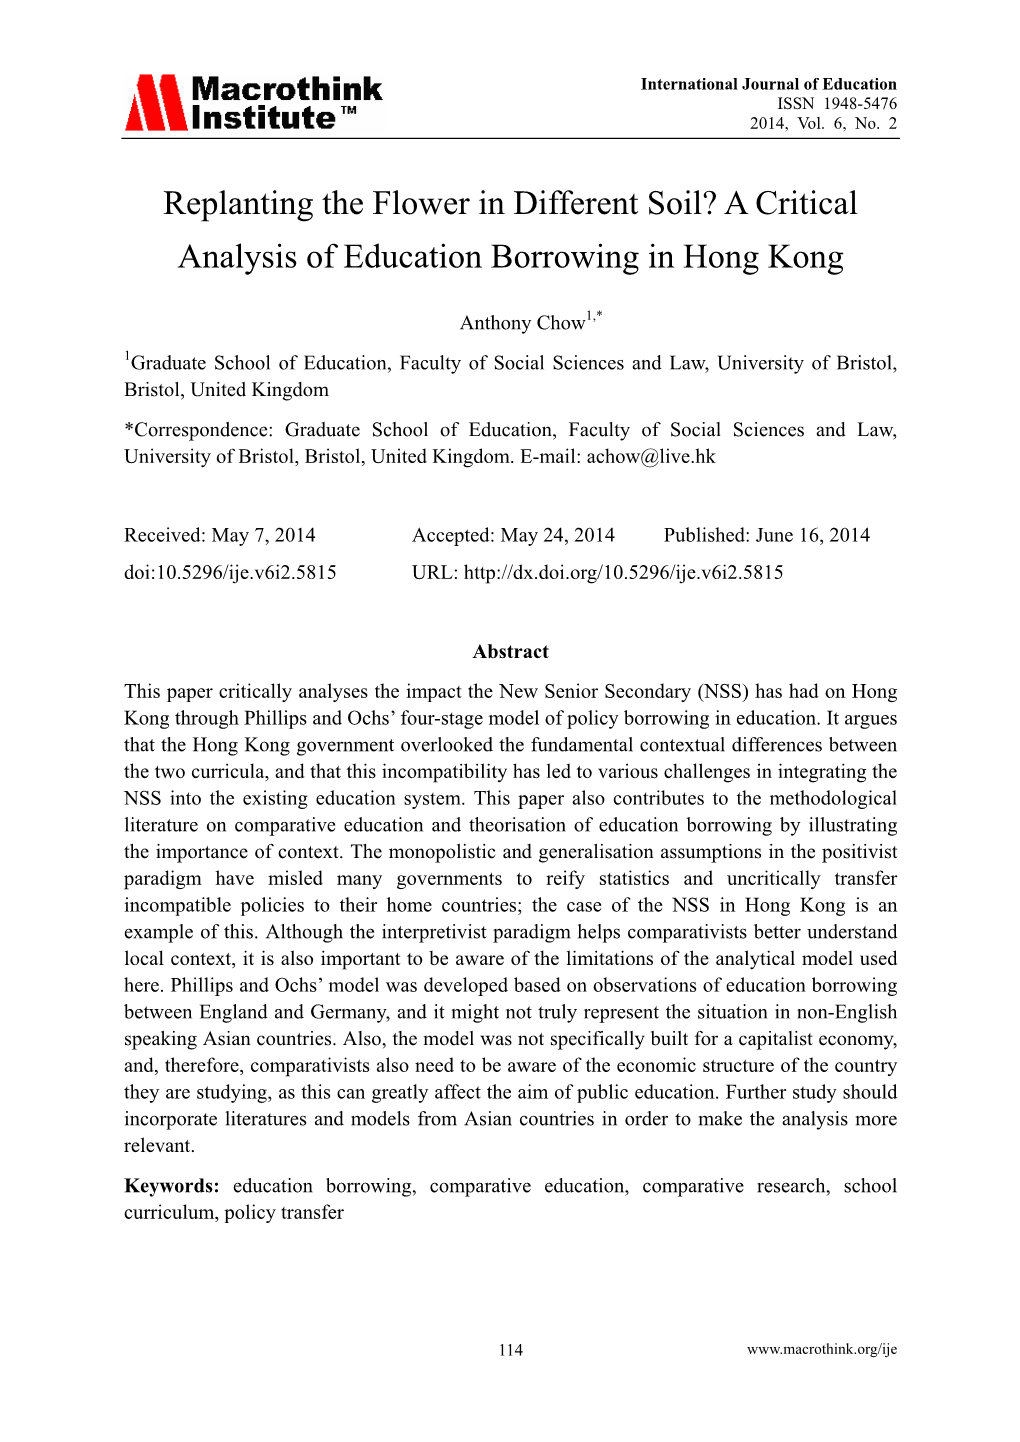 Replanting the Flower in Different Soil? a Critical Analysis of Education Borrowing in Hong Kong